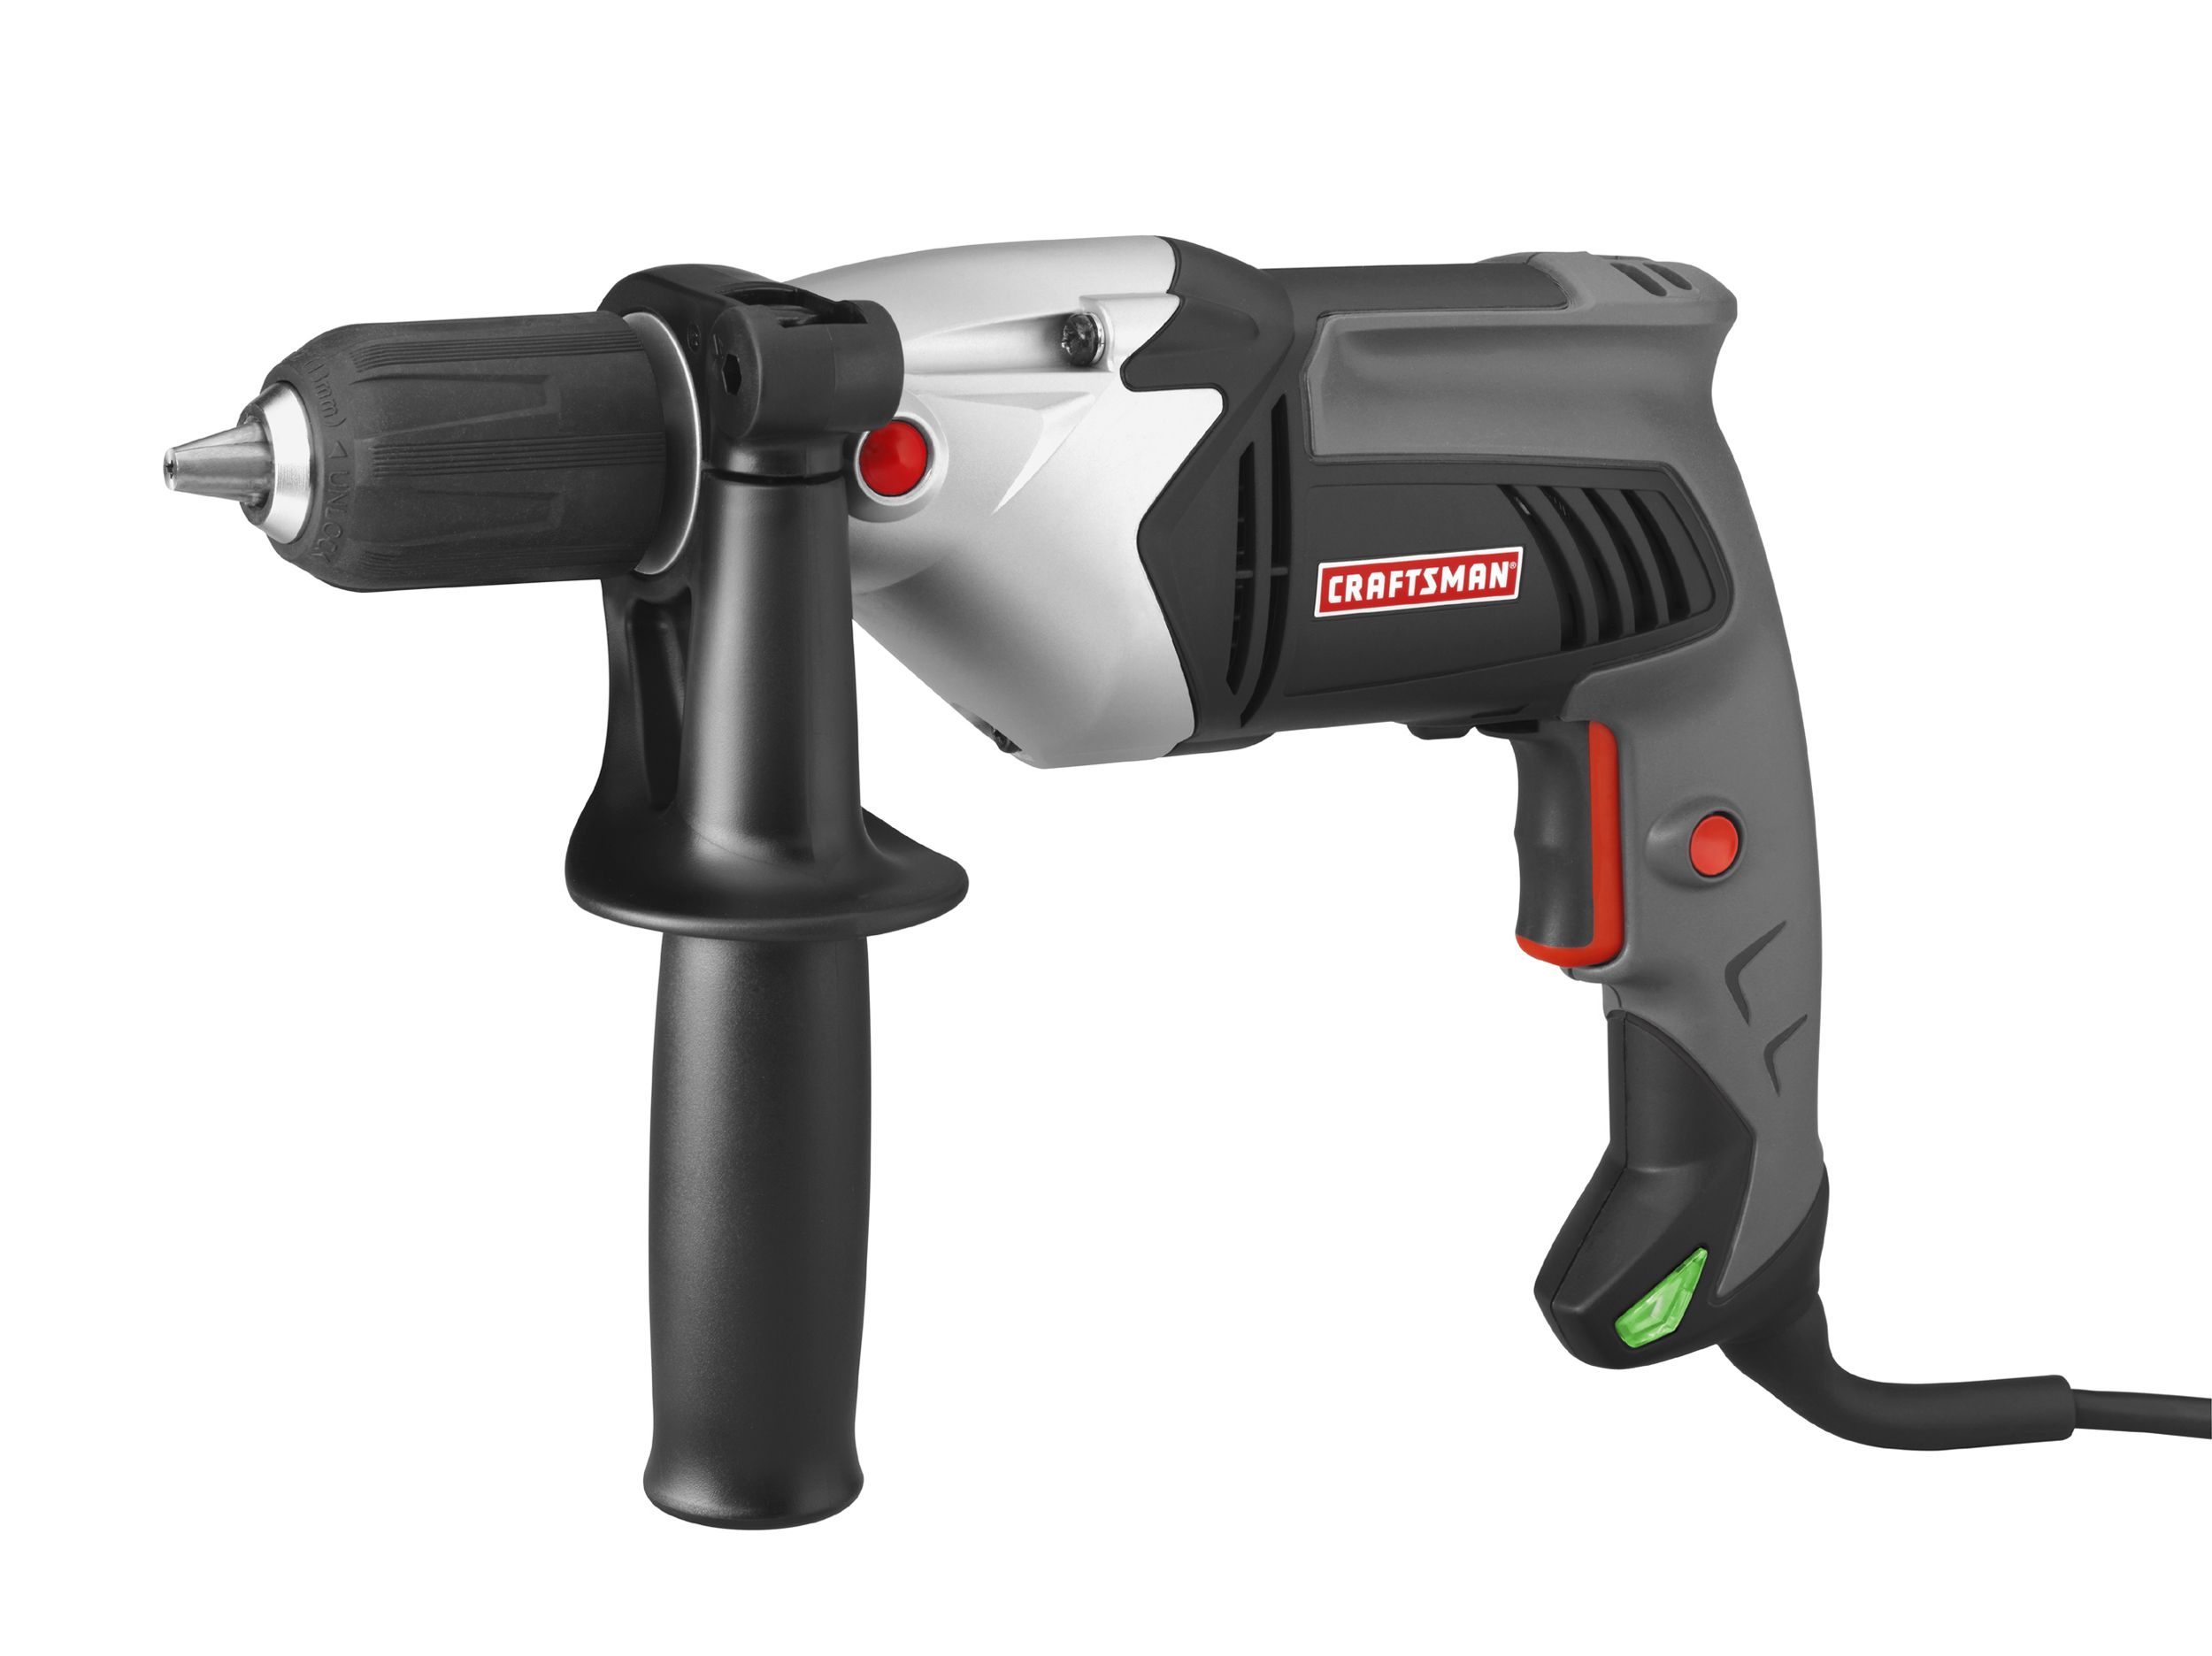 Craftsman 1/2 in. Corded Drill